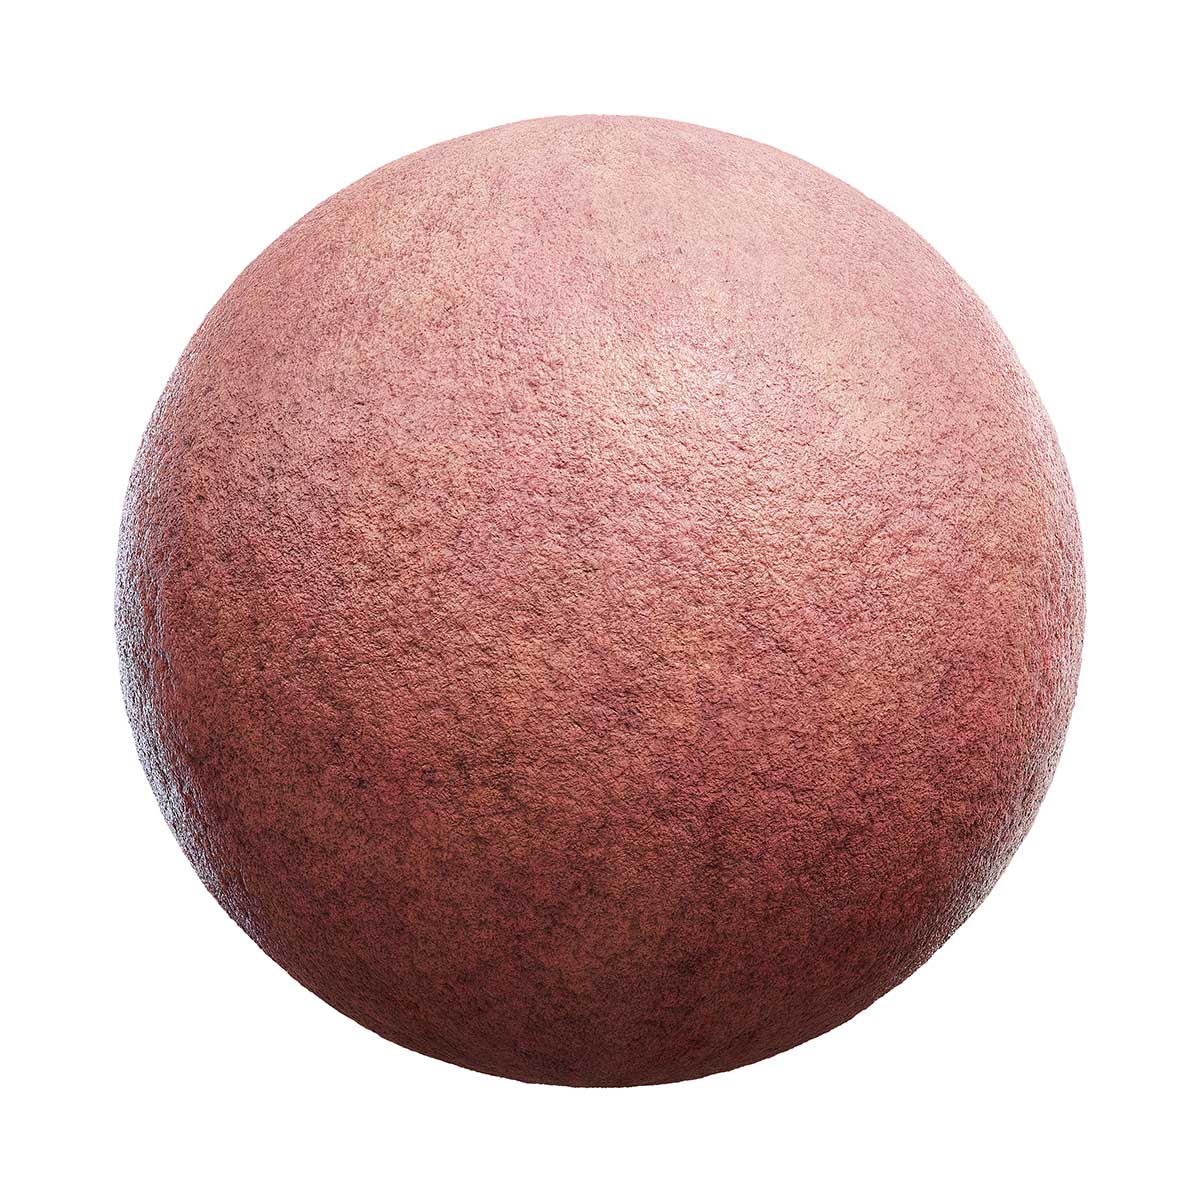 Rough Pink Clay PBR Texture